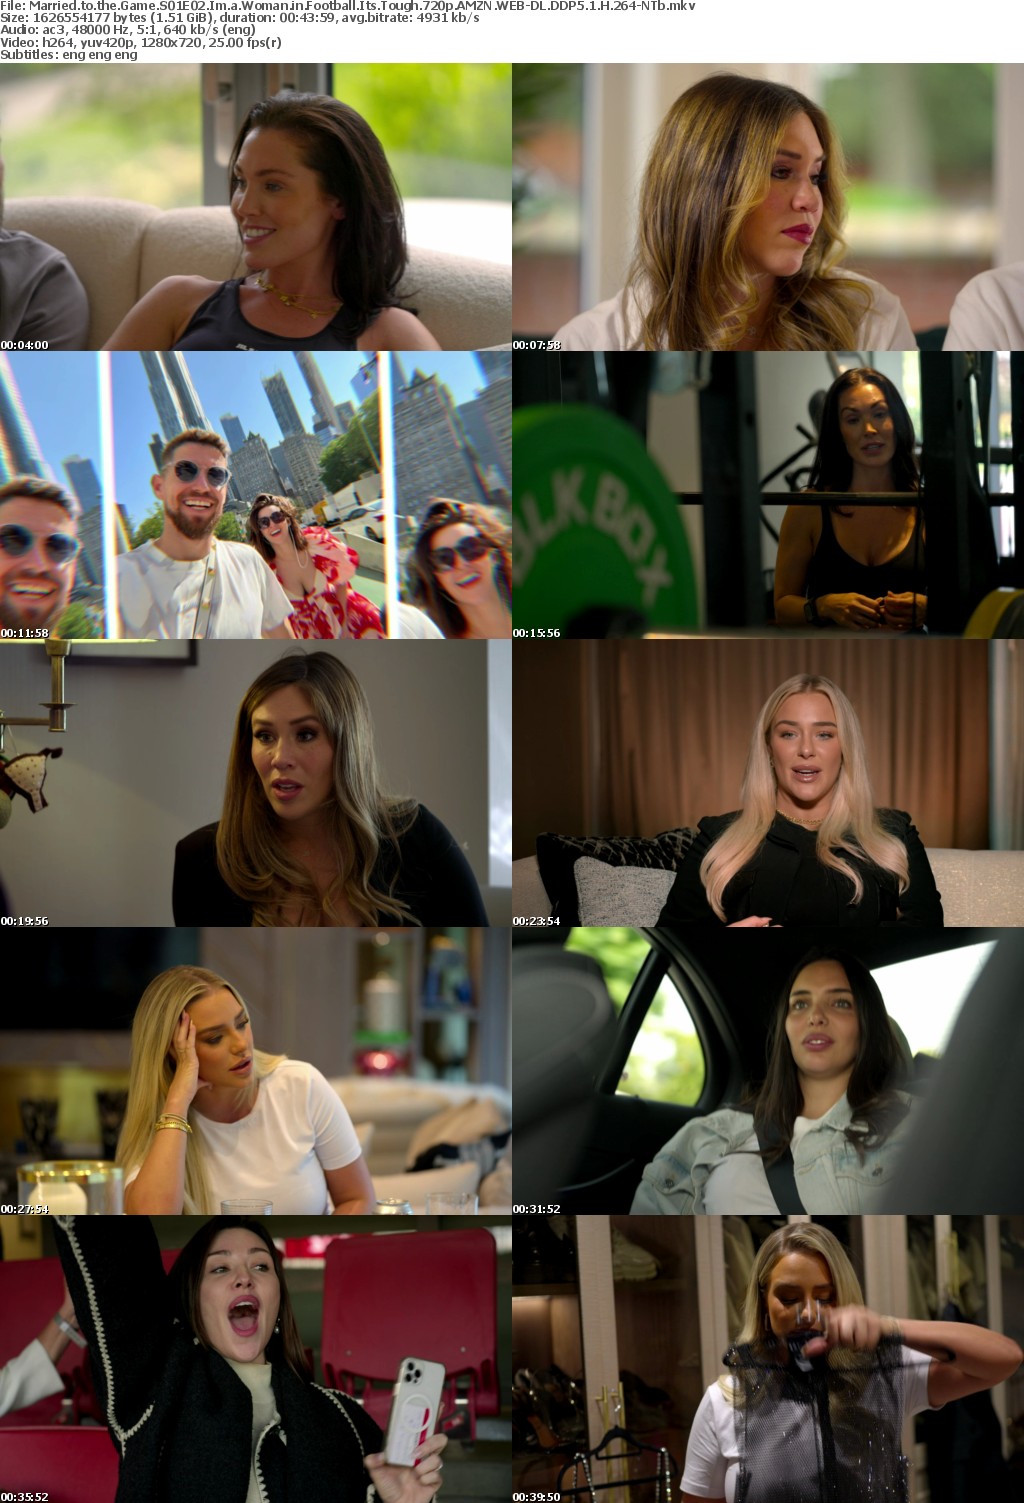 Married to the Game S01E02 Im a Woman in Football Its Tough 720p AMZN WEB-DL DDP5 1 H 264-NTb